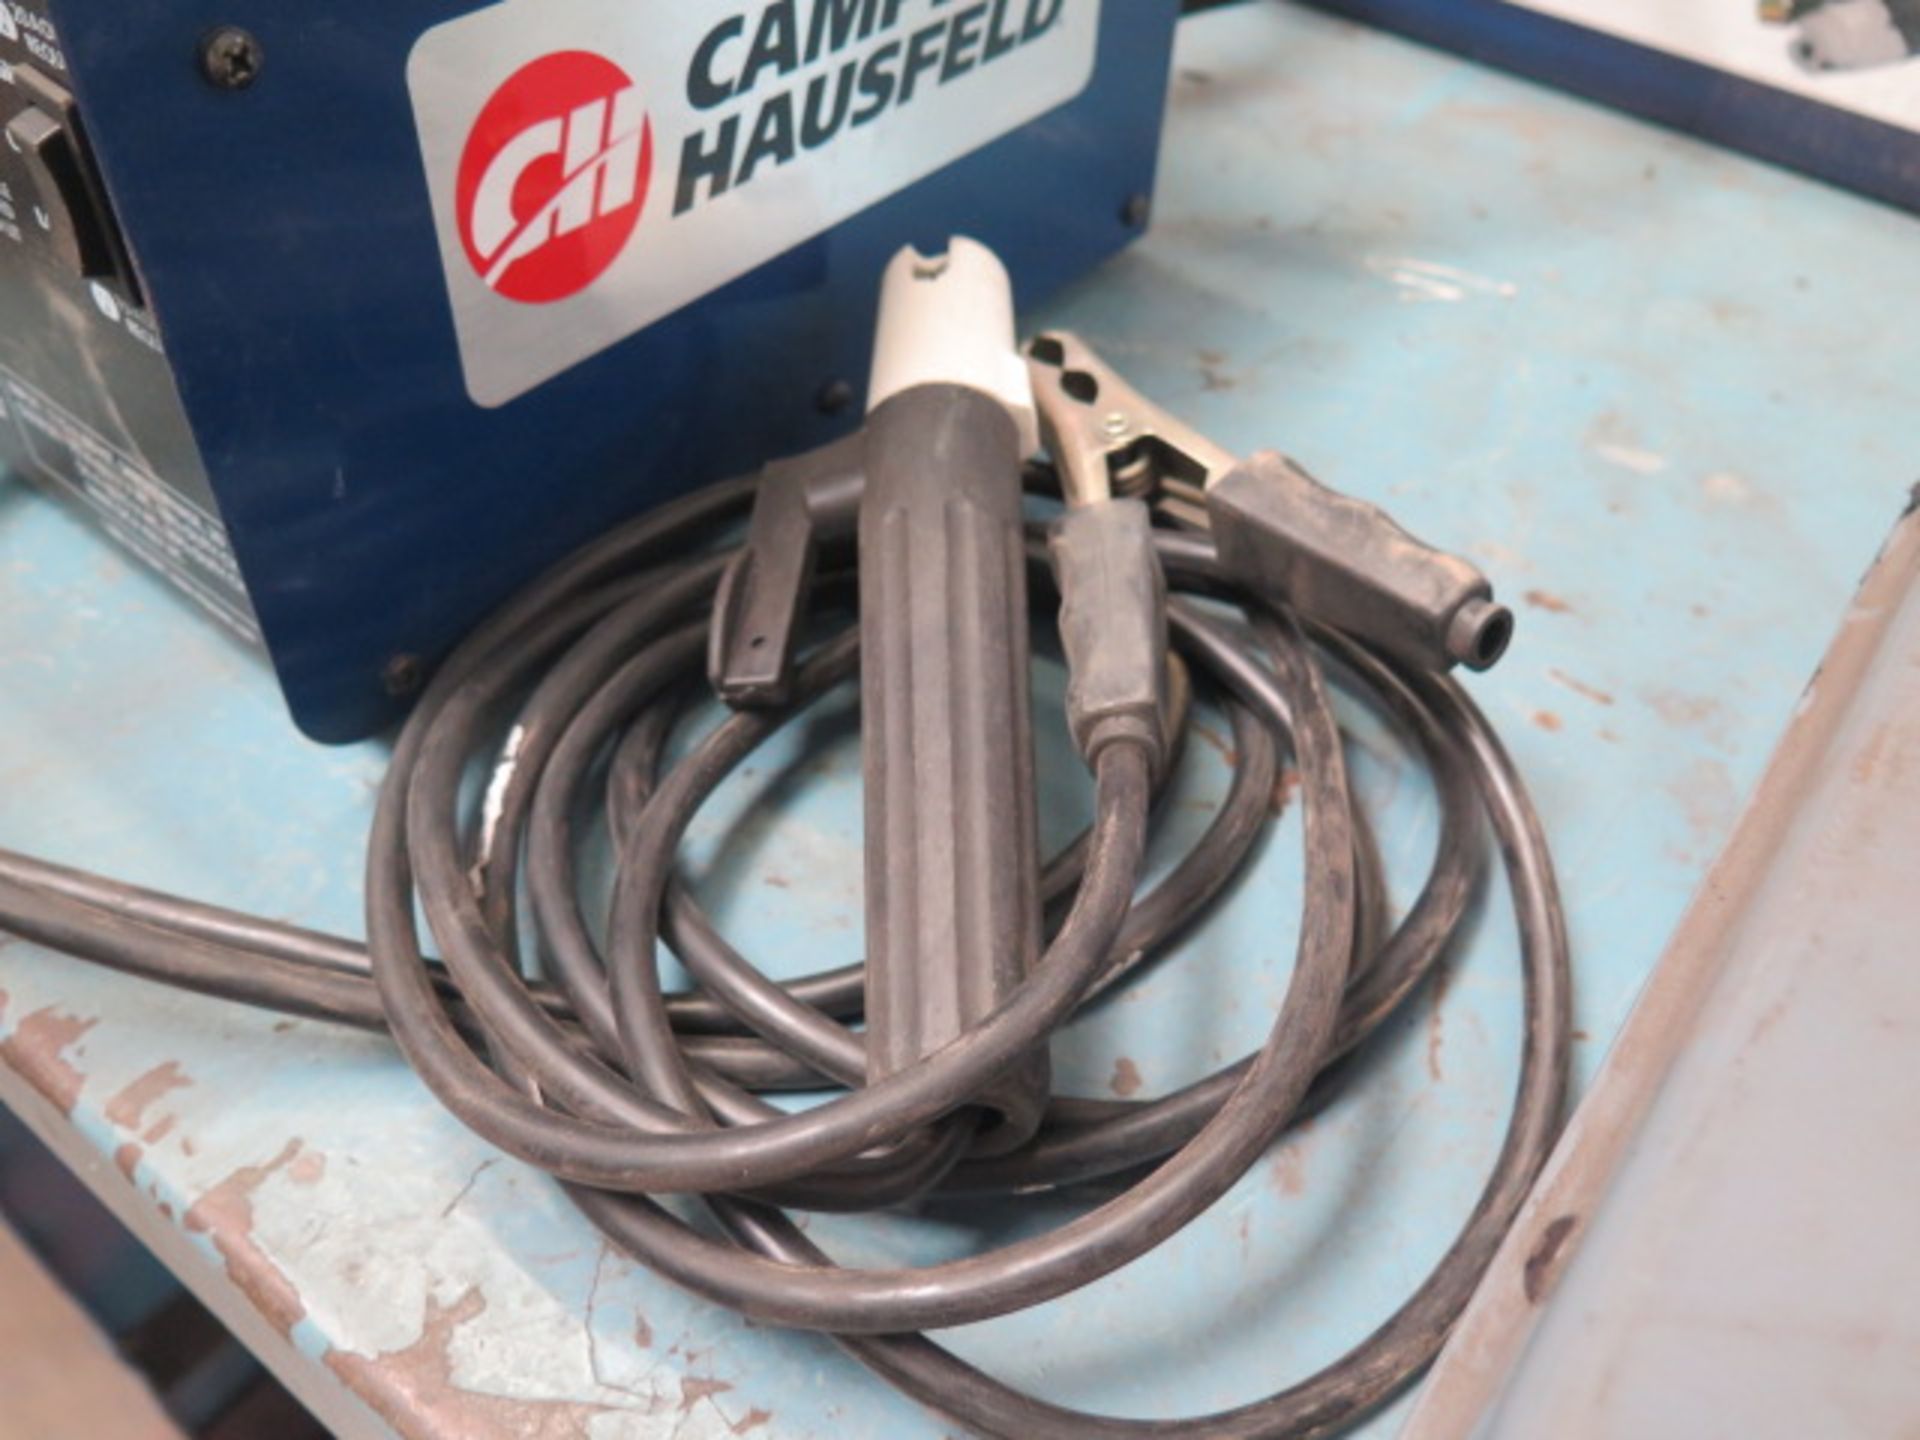 Campbell Hausfeld 70 Amp - 115 Volt Stick Welder (SOLD AS-IS - NO WARRANTY) - Image 4 of 5